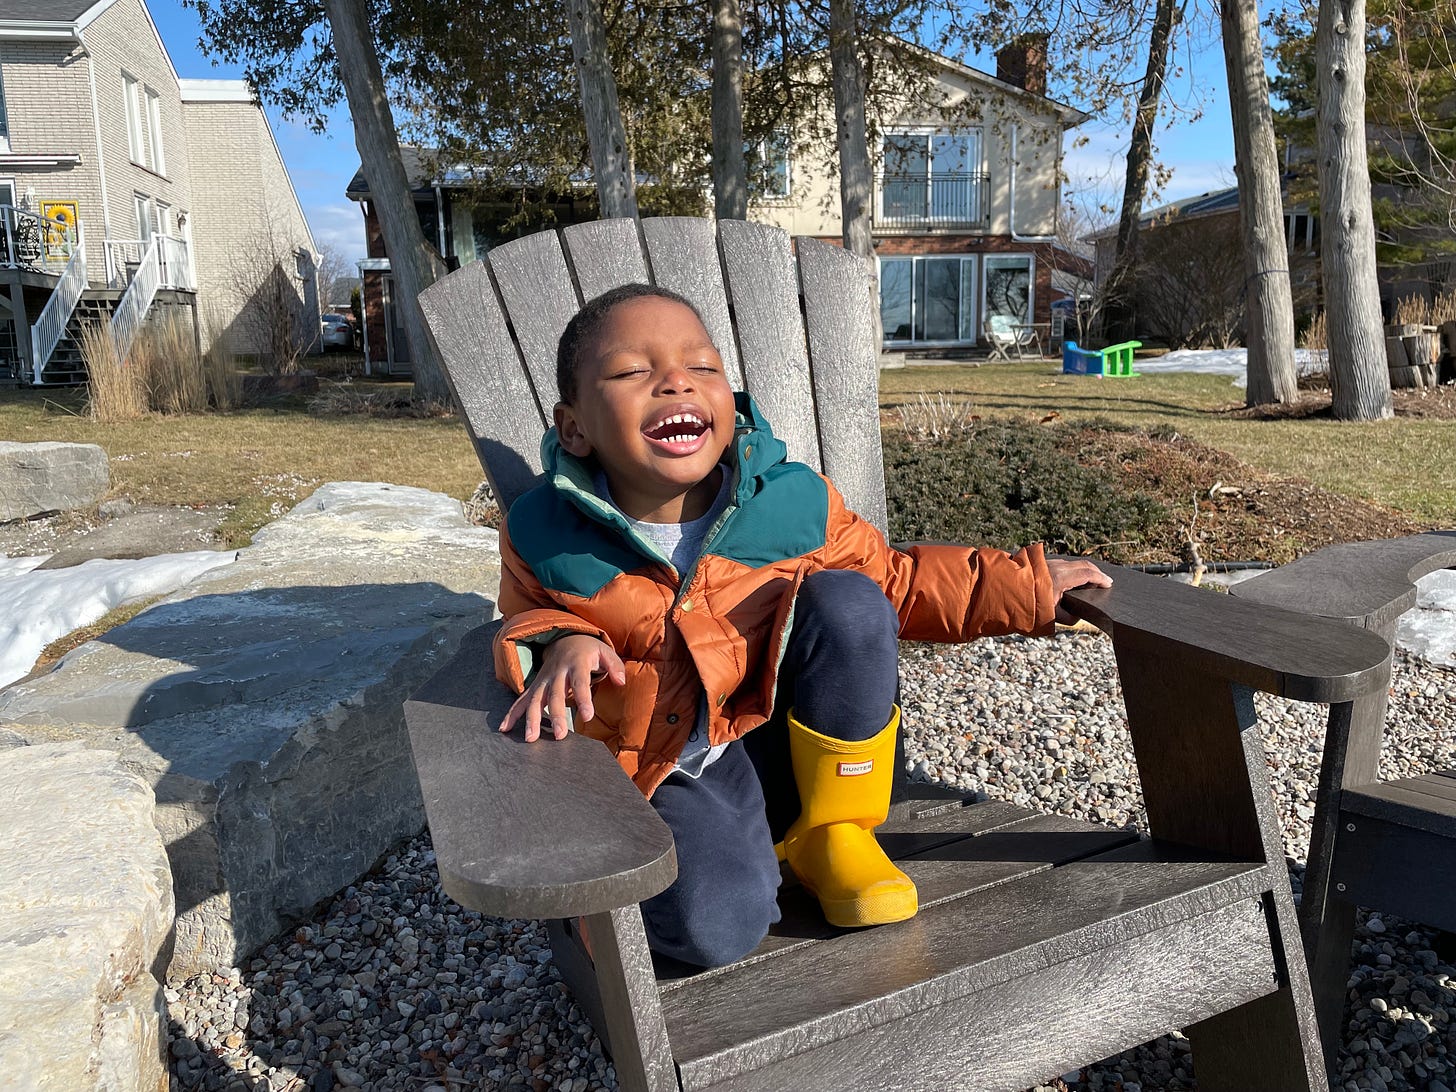 a Black boy in an orange coat opens his mouth, smiling, into the sun